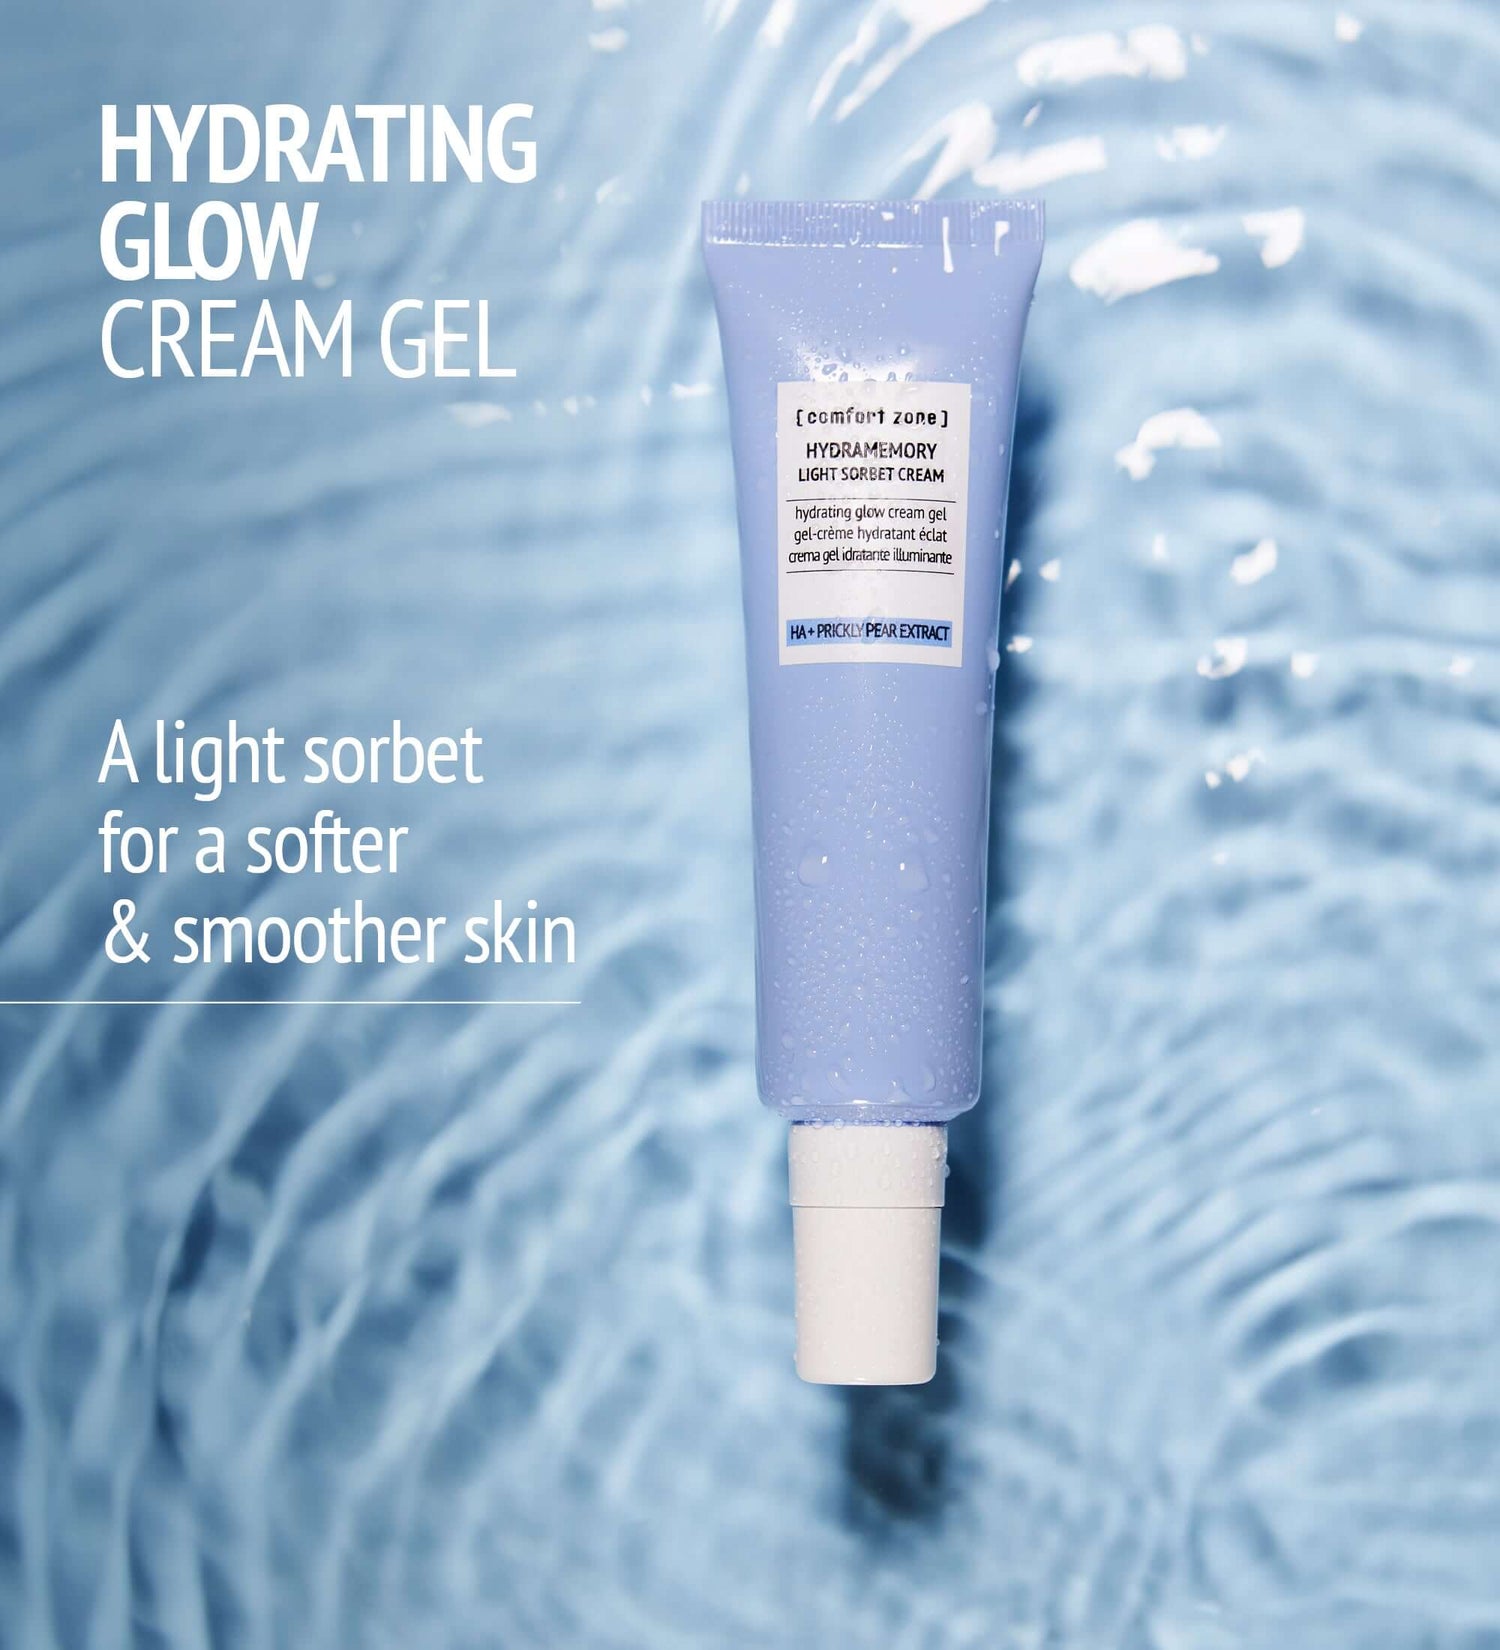 The HydramemoryLight Sorbet Cream from comfort zone is displayed with water in the background accompanied by a description. 